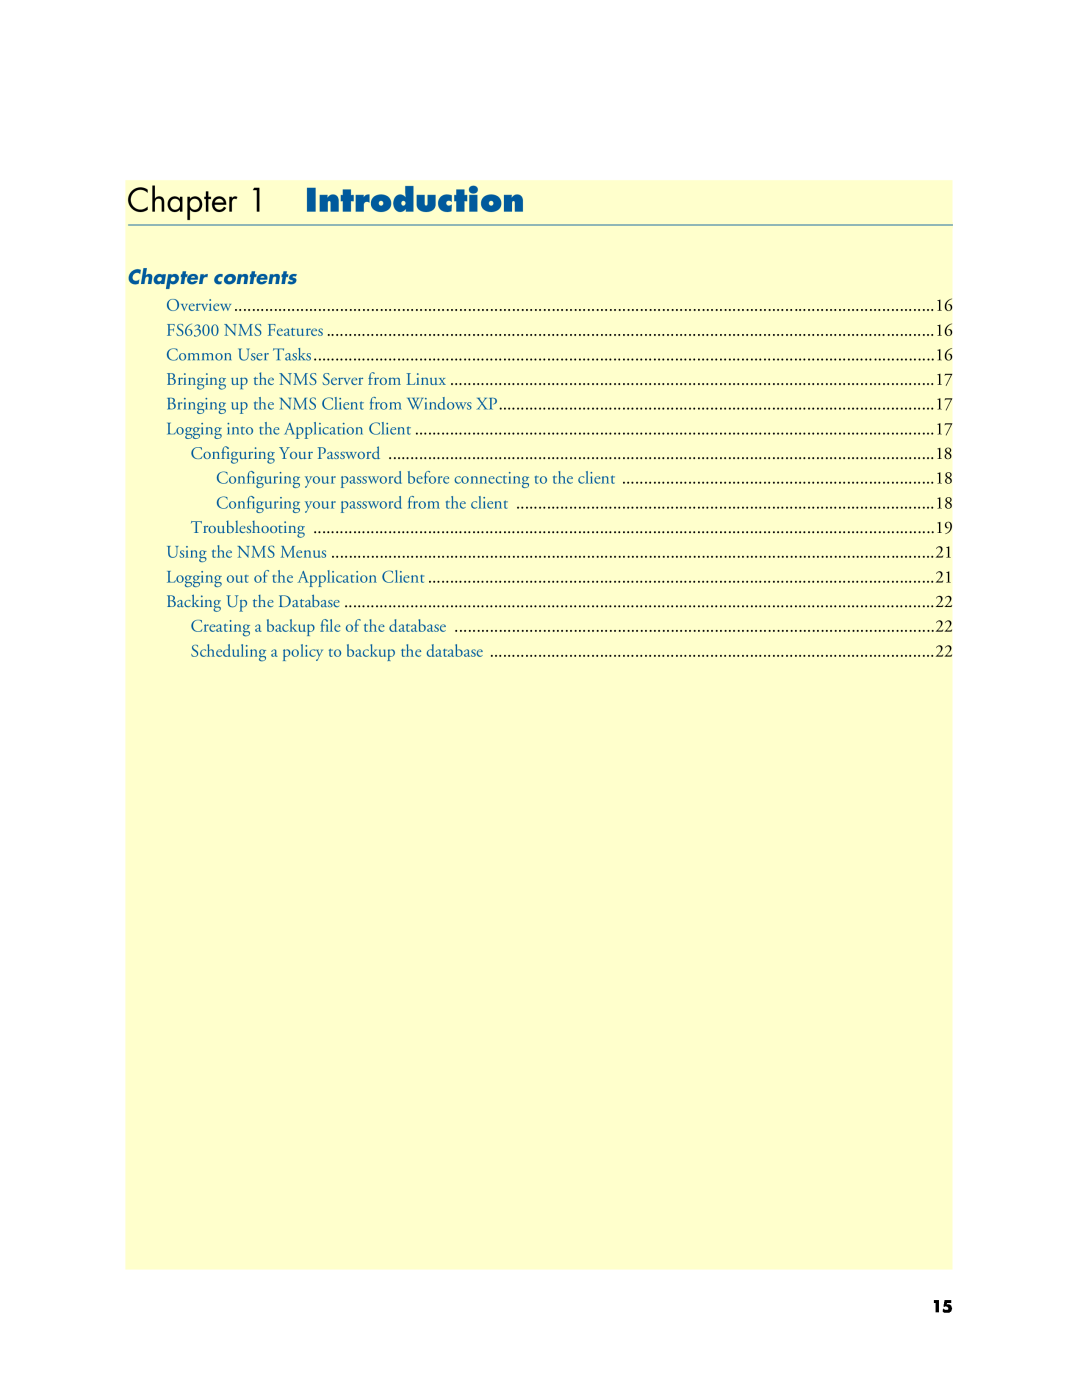 Patton electronic 6300 user manual Introduction, Chapter contents 